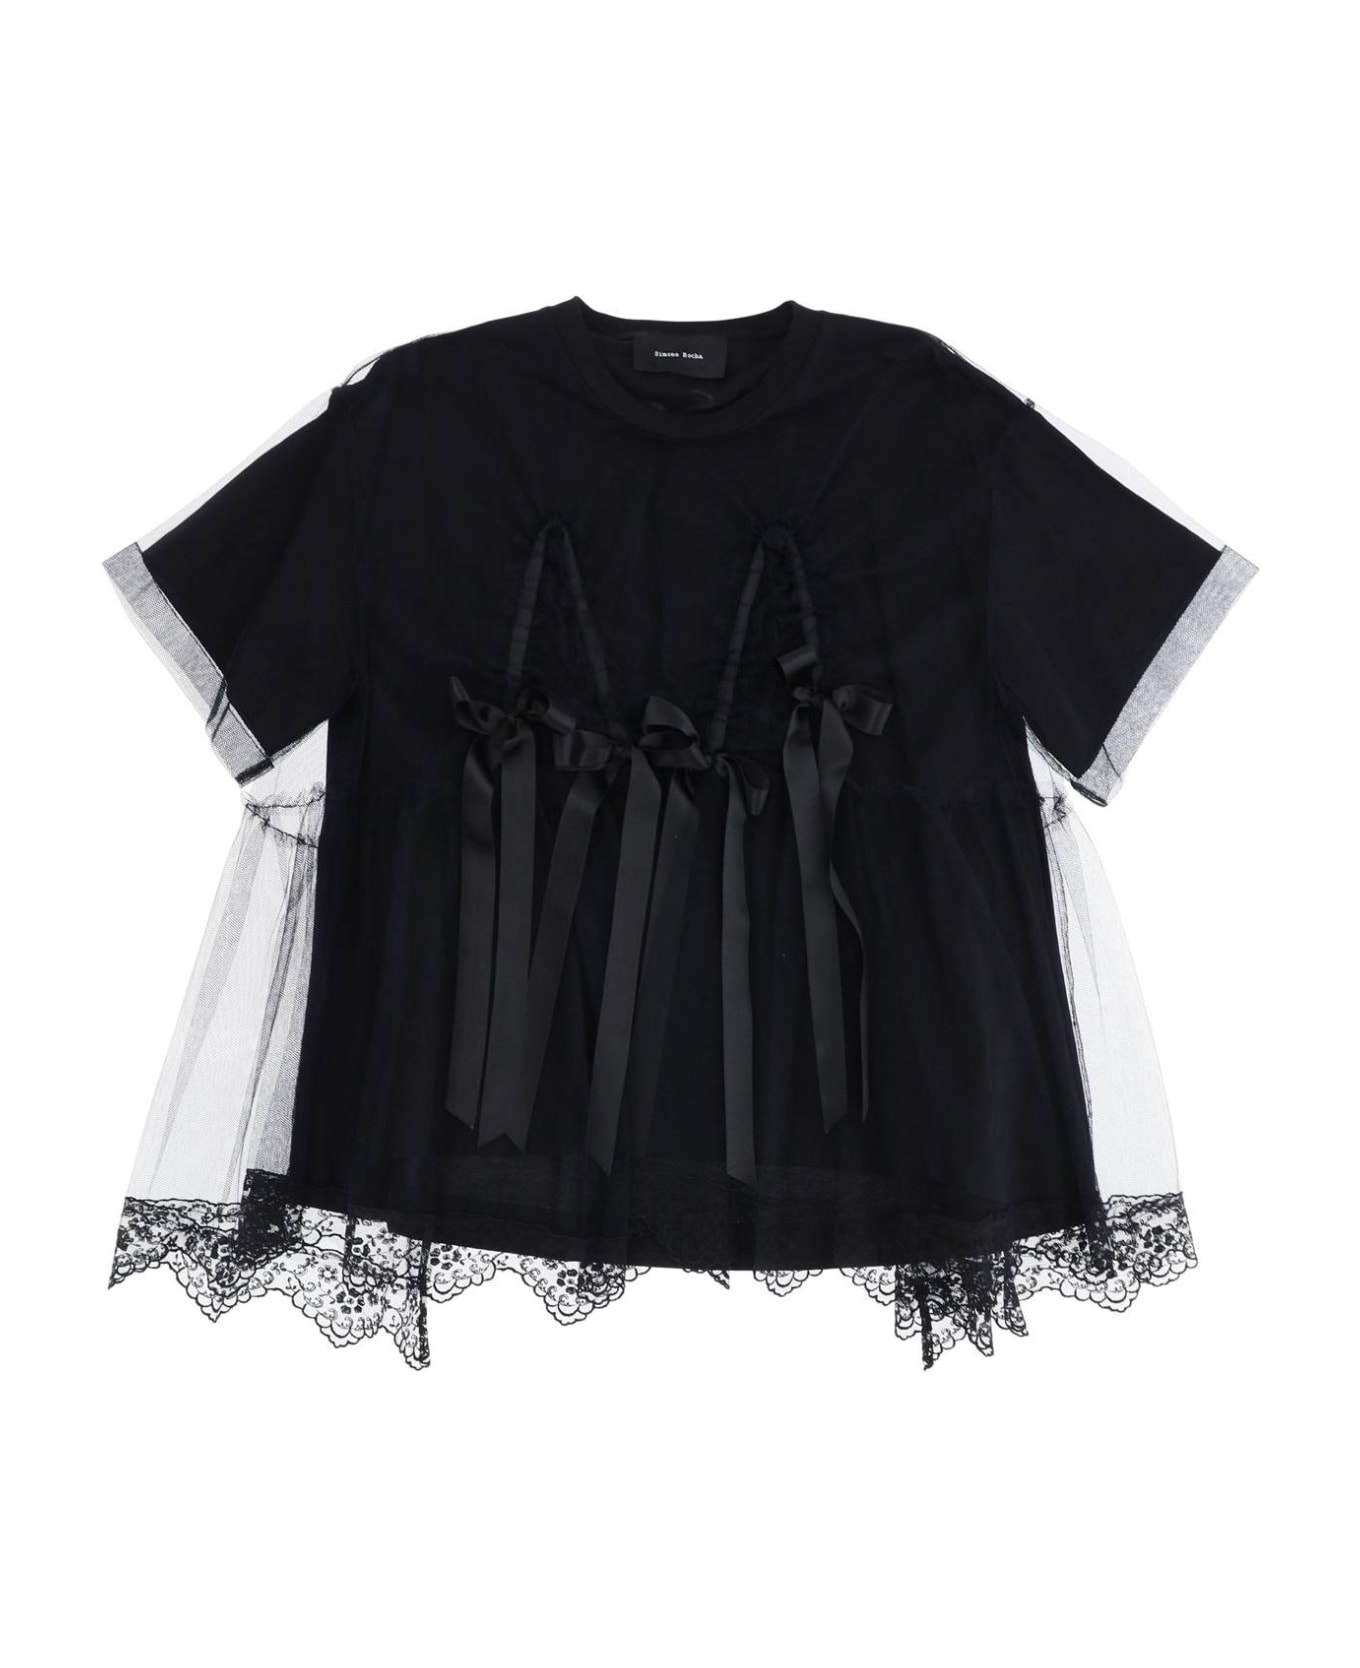 Simone Rocha Tulle Top With Lace And Bows - BLACK (Black)